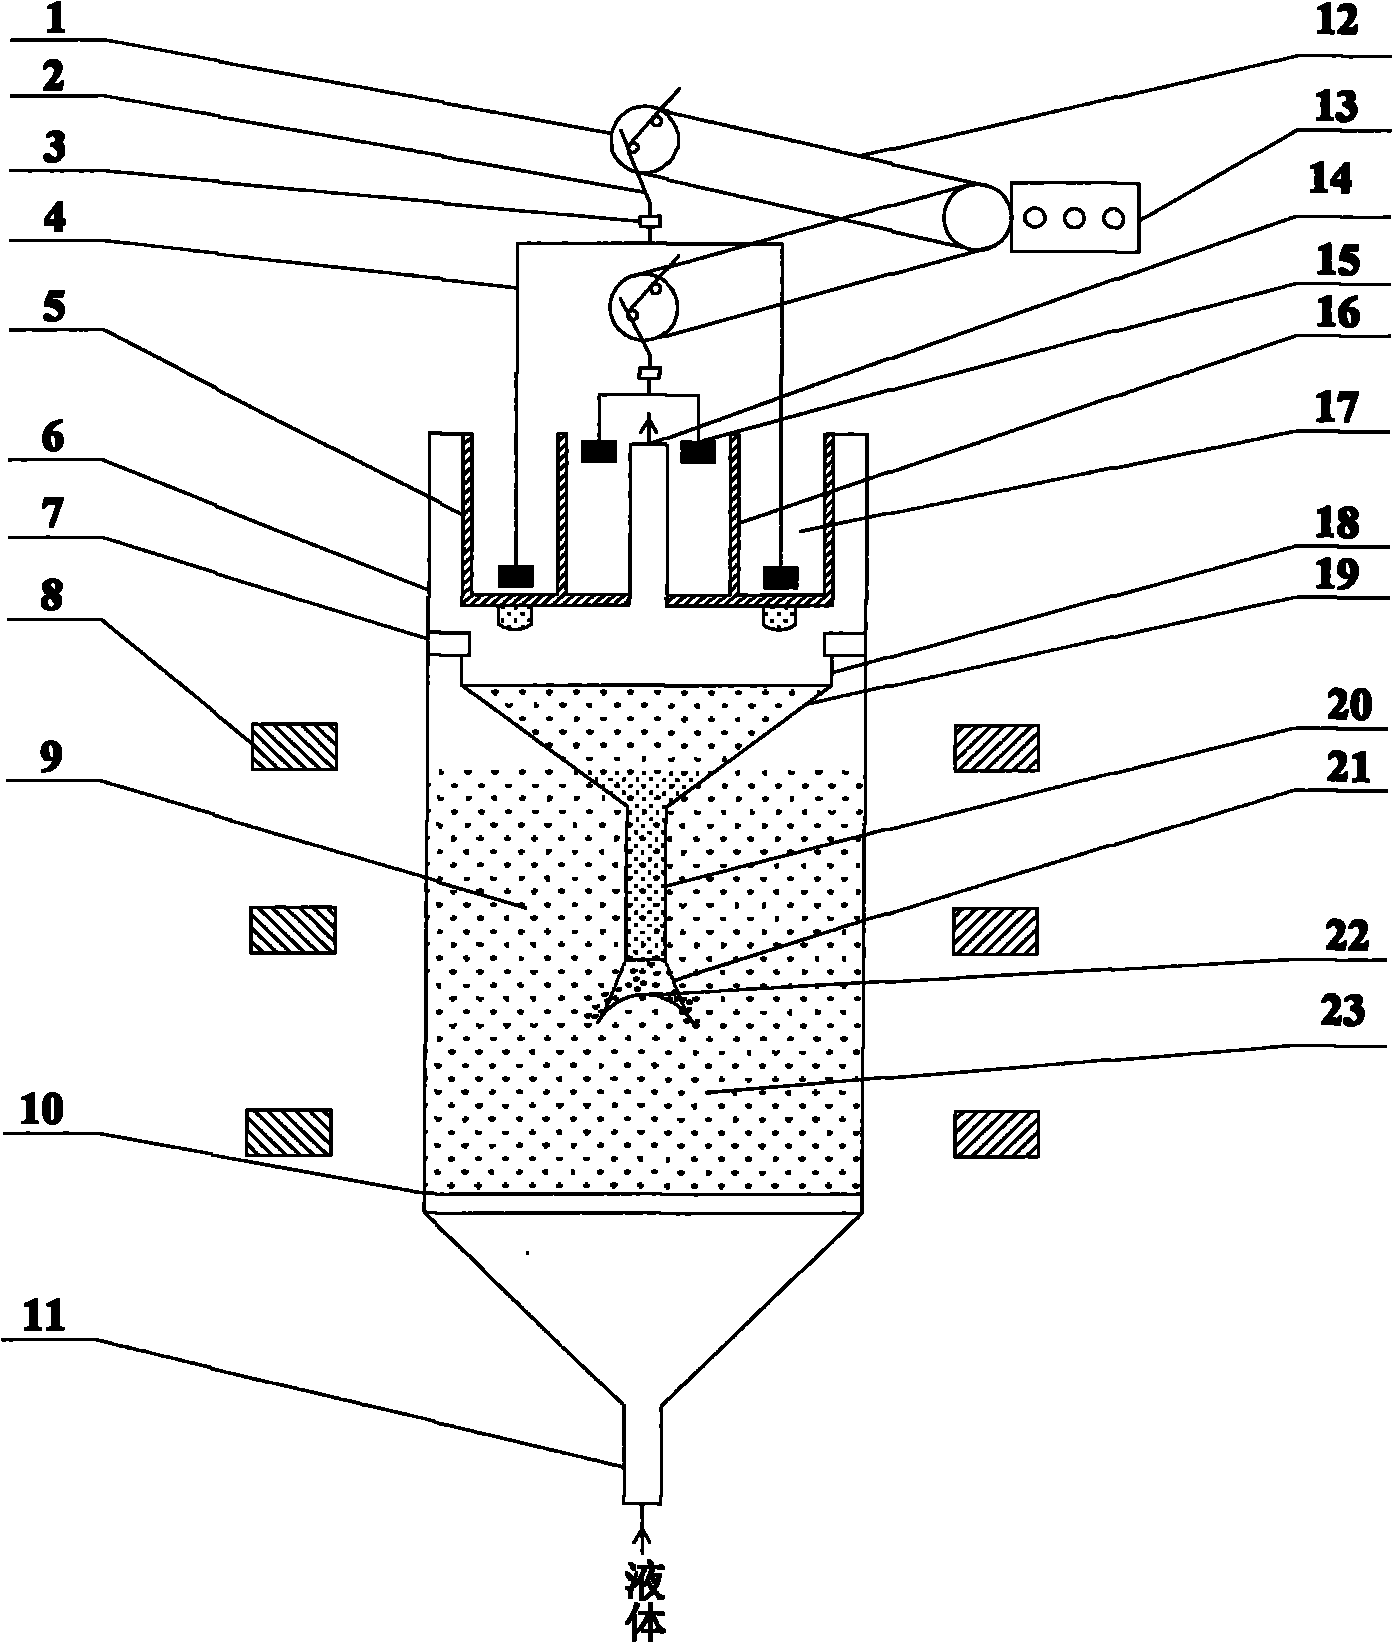 Magnetic-particle in-situ separation device for magnetic stabilization fluidized bed